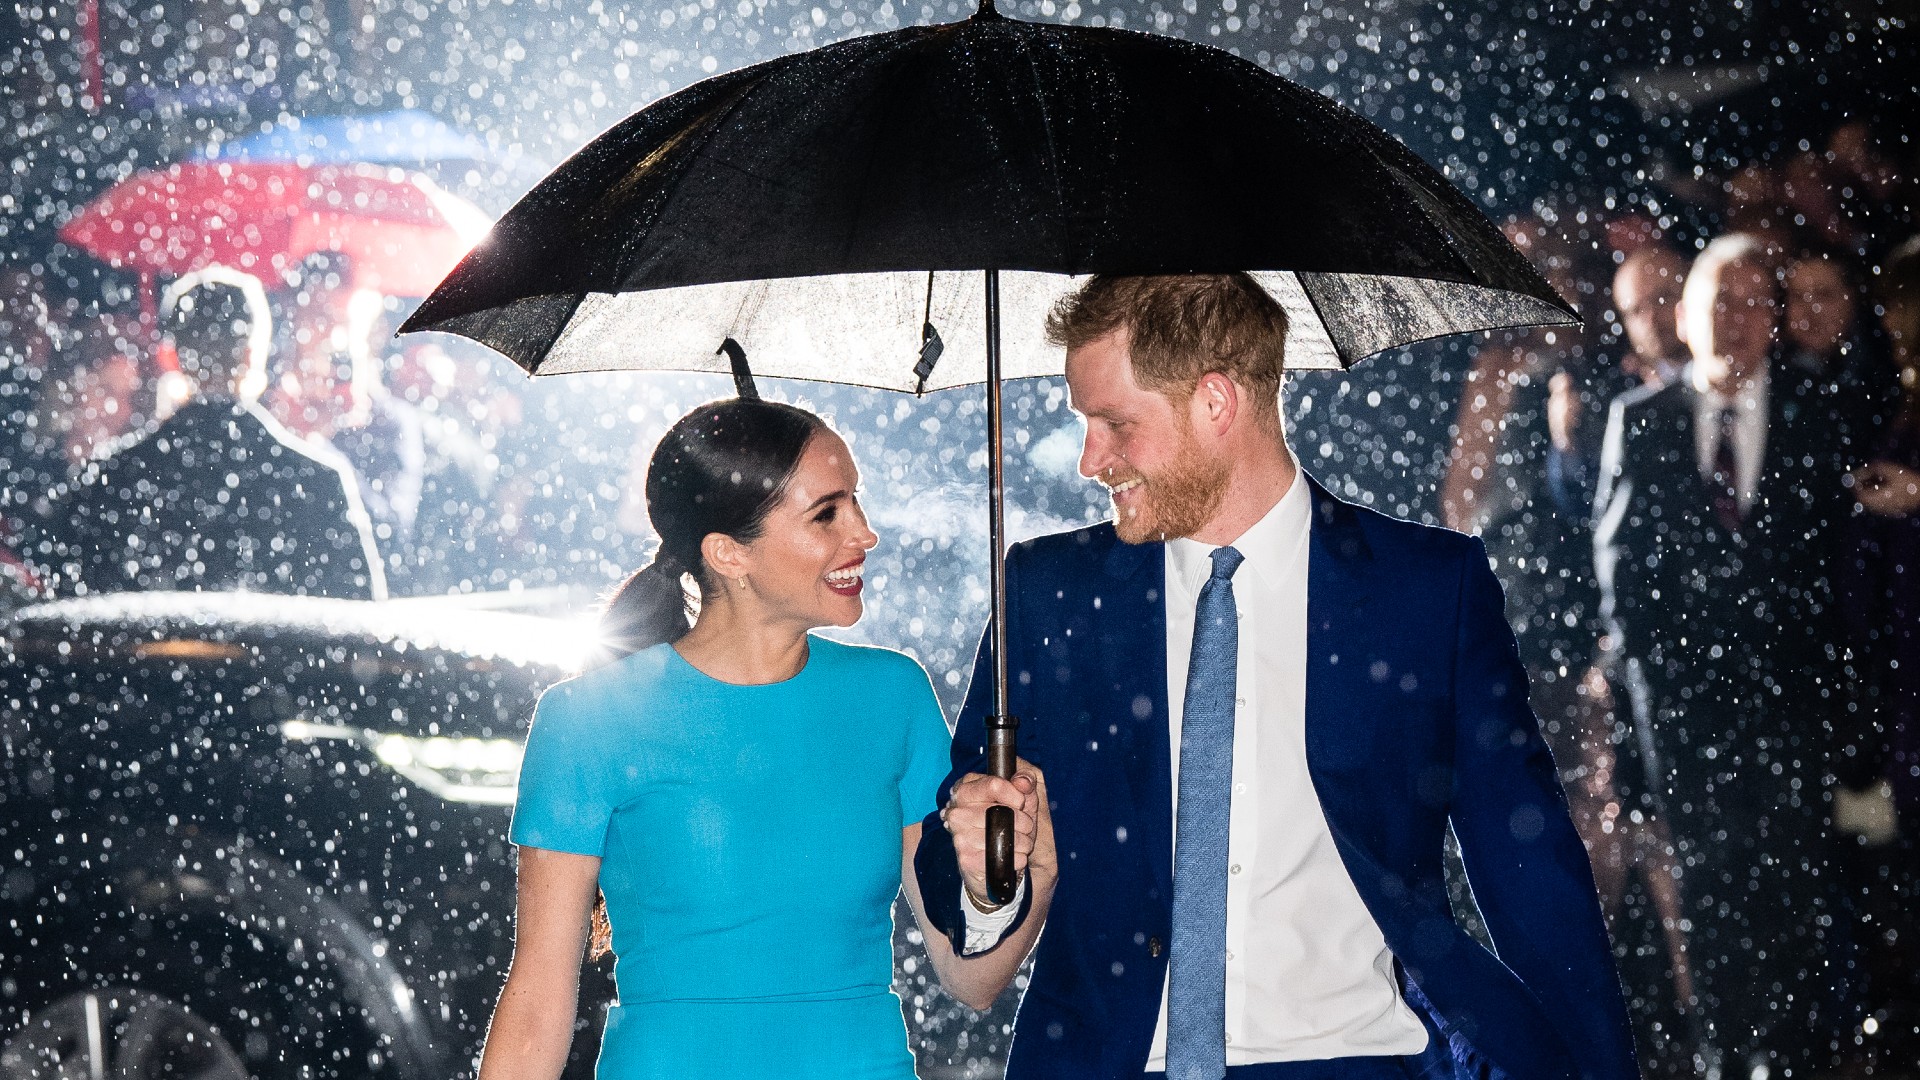 Netflix's 'Harry & Meghan': What to Expect, According to Royal Experts